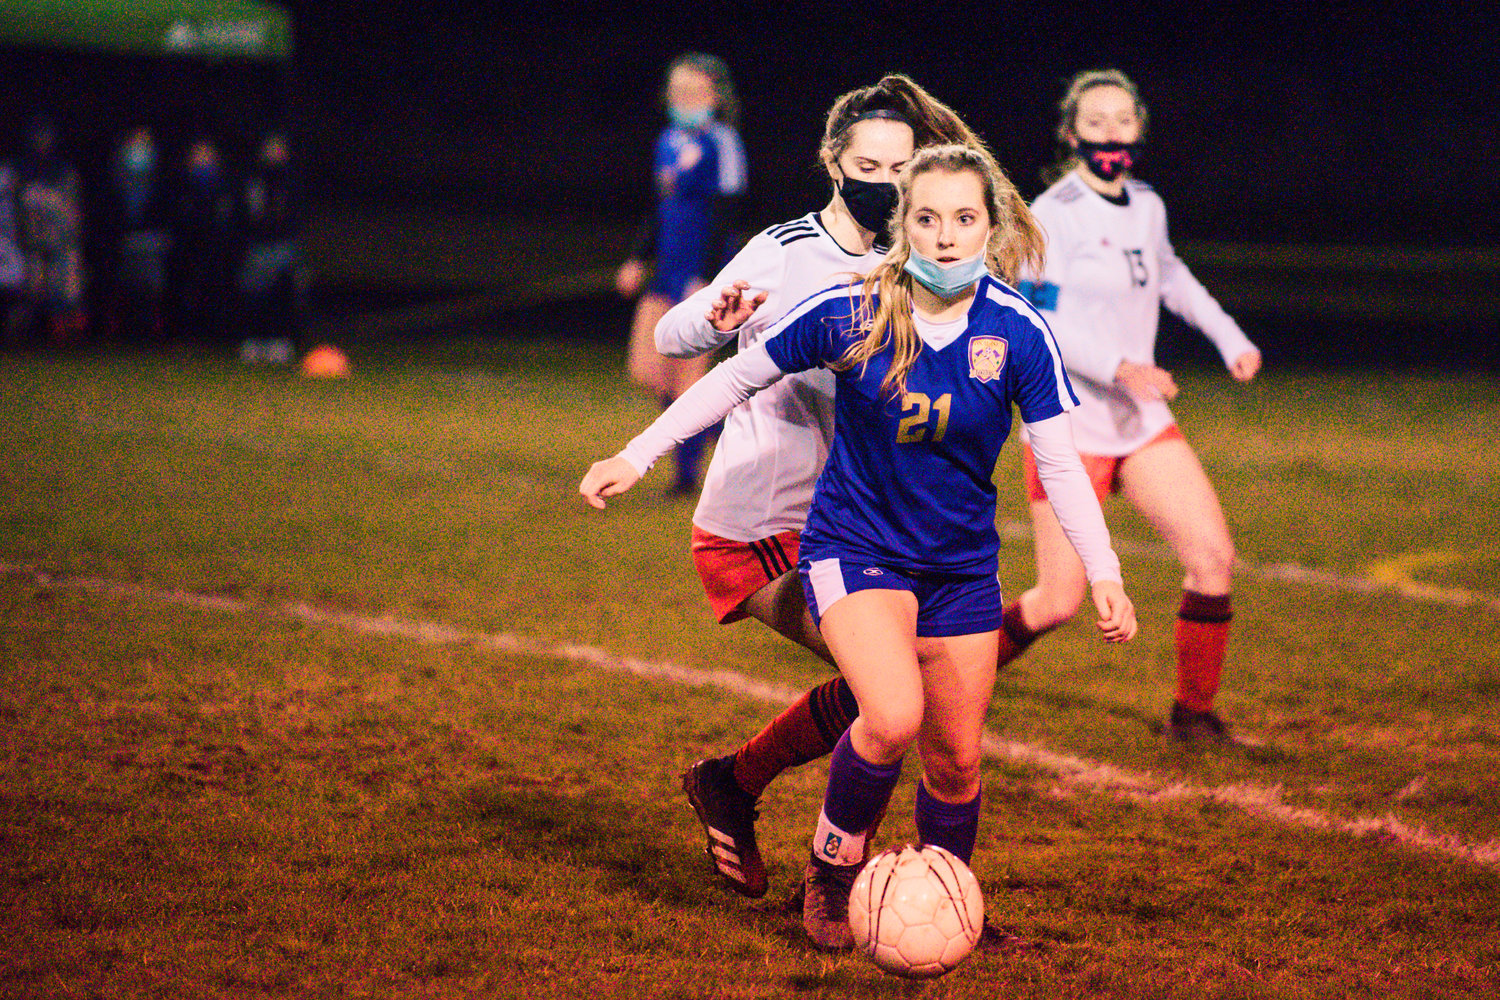 Onalaska's Callie Lawrence (21) takes the ball down field during a game against Toledo Monday night.